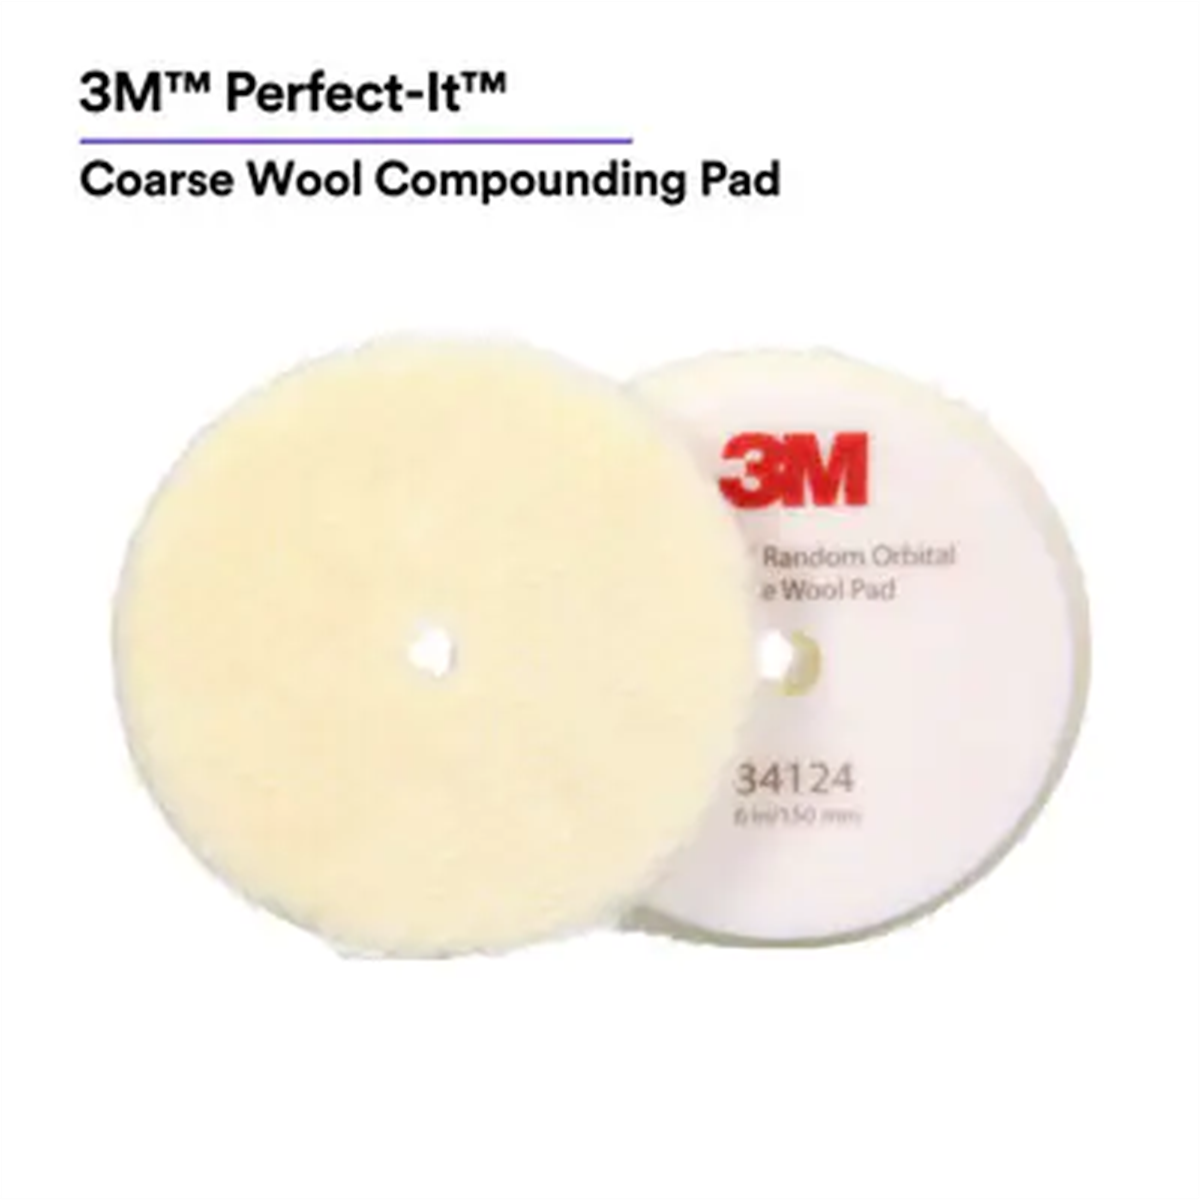 Picture of 3M MMM34125 6 in. Perfect-It Random Orbital Medium Wool Compounding Pad, White - 2 Pads per Bag